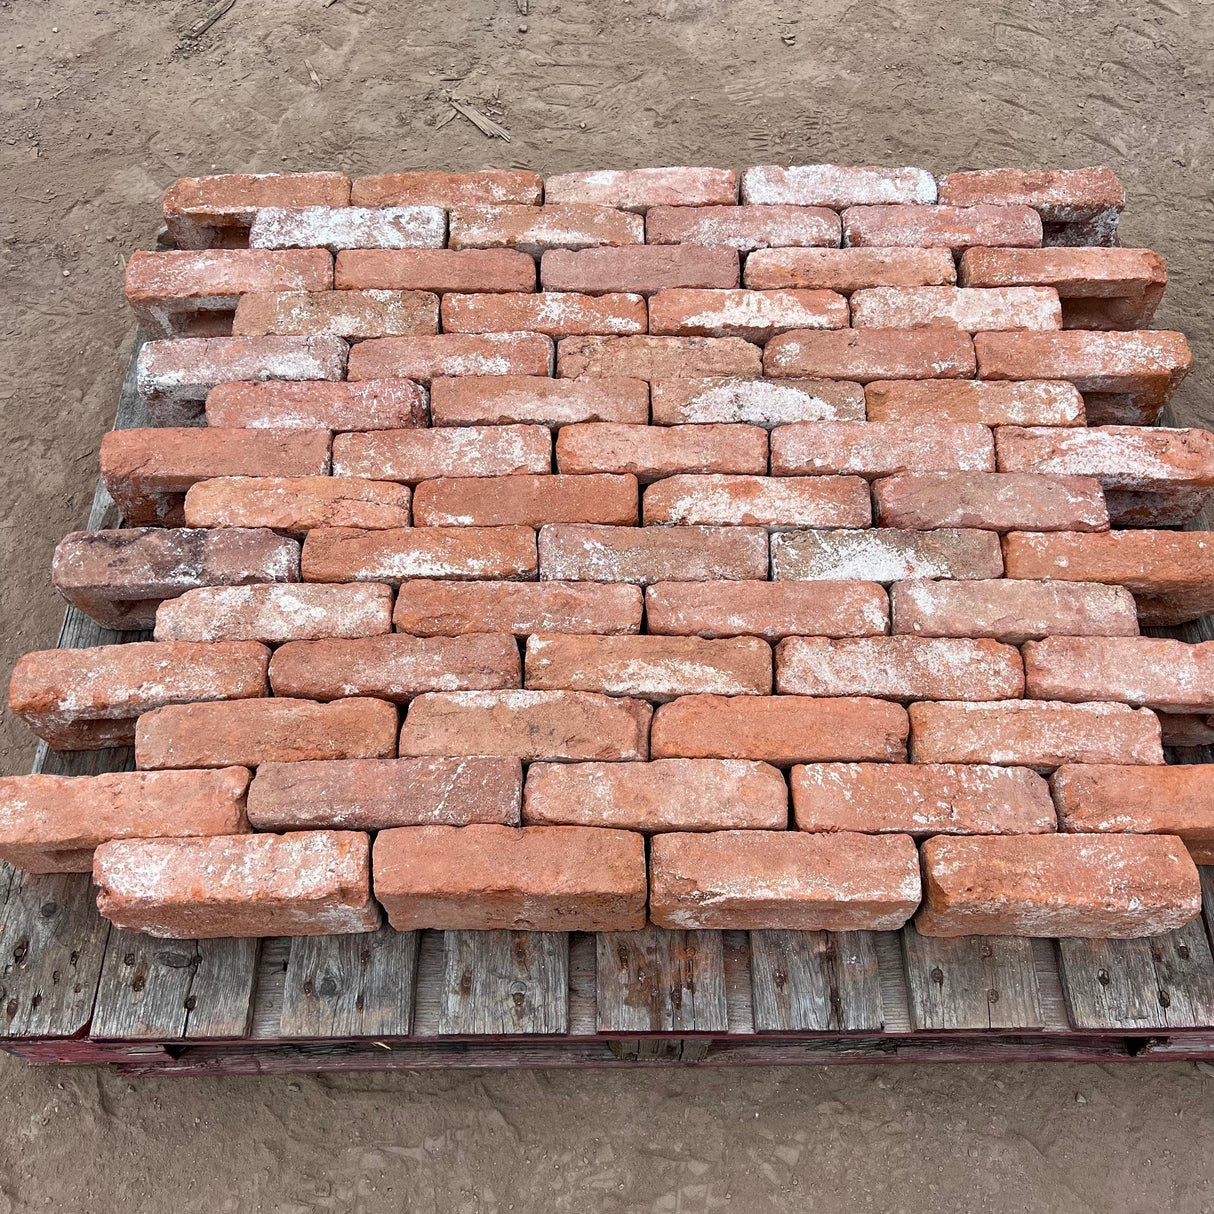 Reclaimed 2 3/8 inch Antique Handmade Brick | Pack of 544 Bricks | Free Delivery - Reclaimed Brick Company